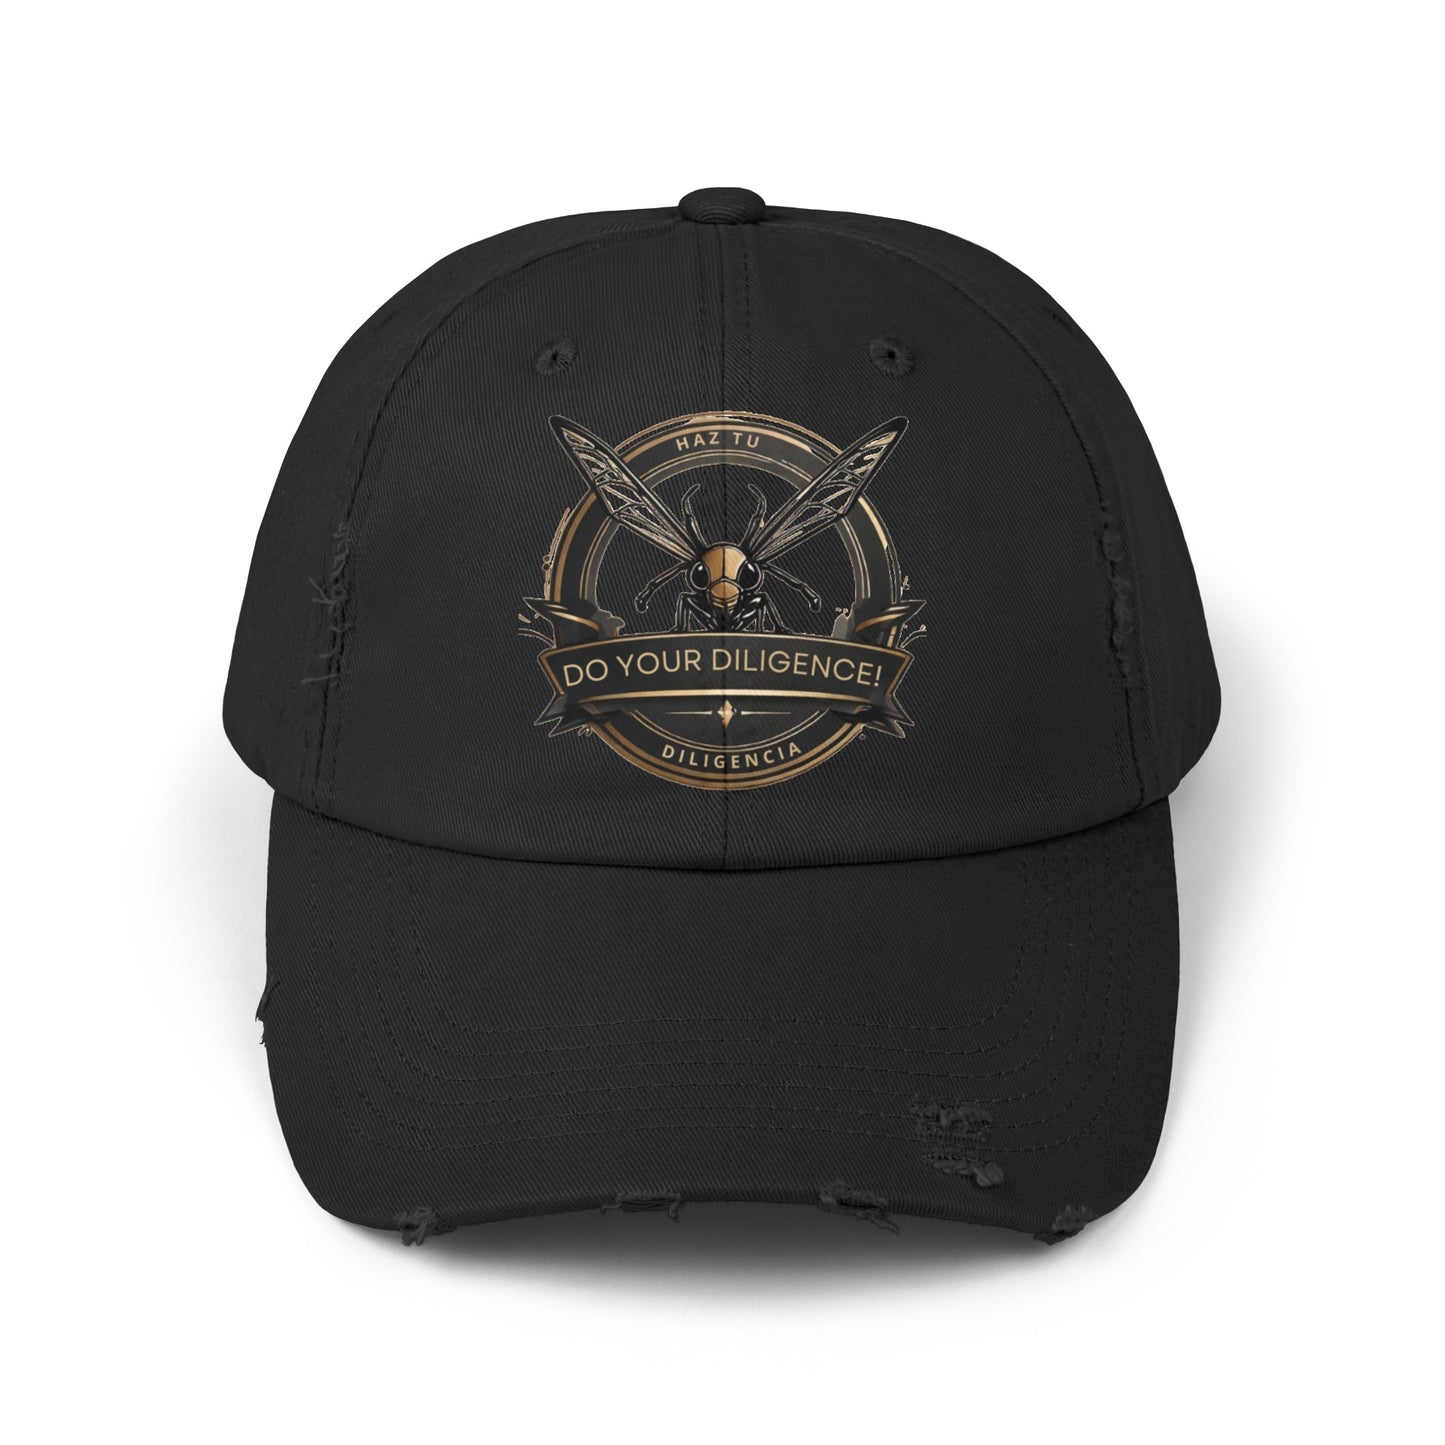 Do Your Diligence! Unisex Distressed Cap